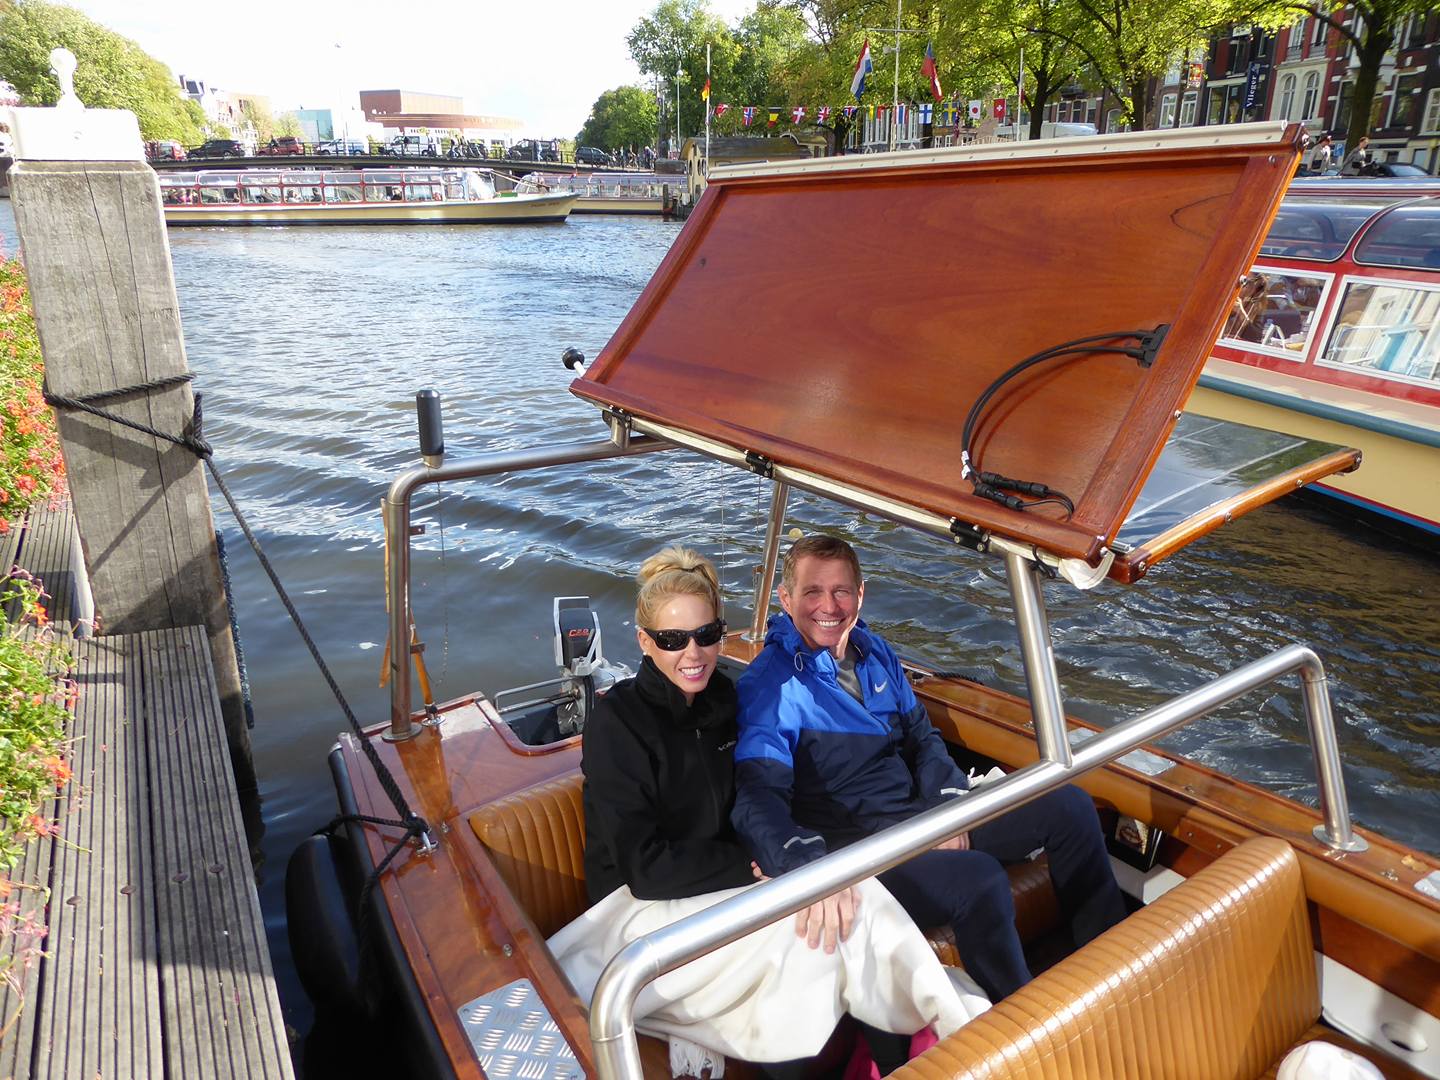 Rachelle Ginsberg riding in a boat in Amsterdam, Netherlands